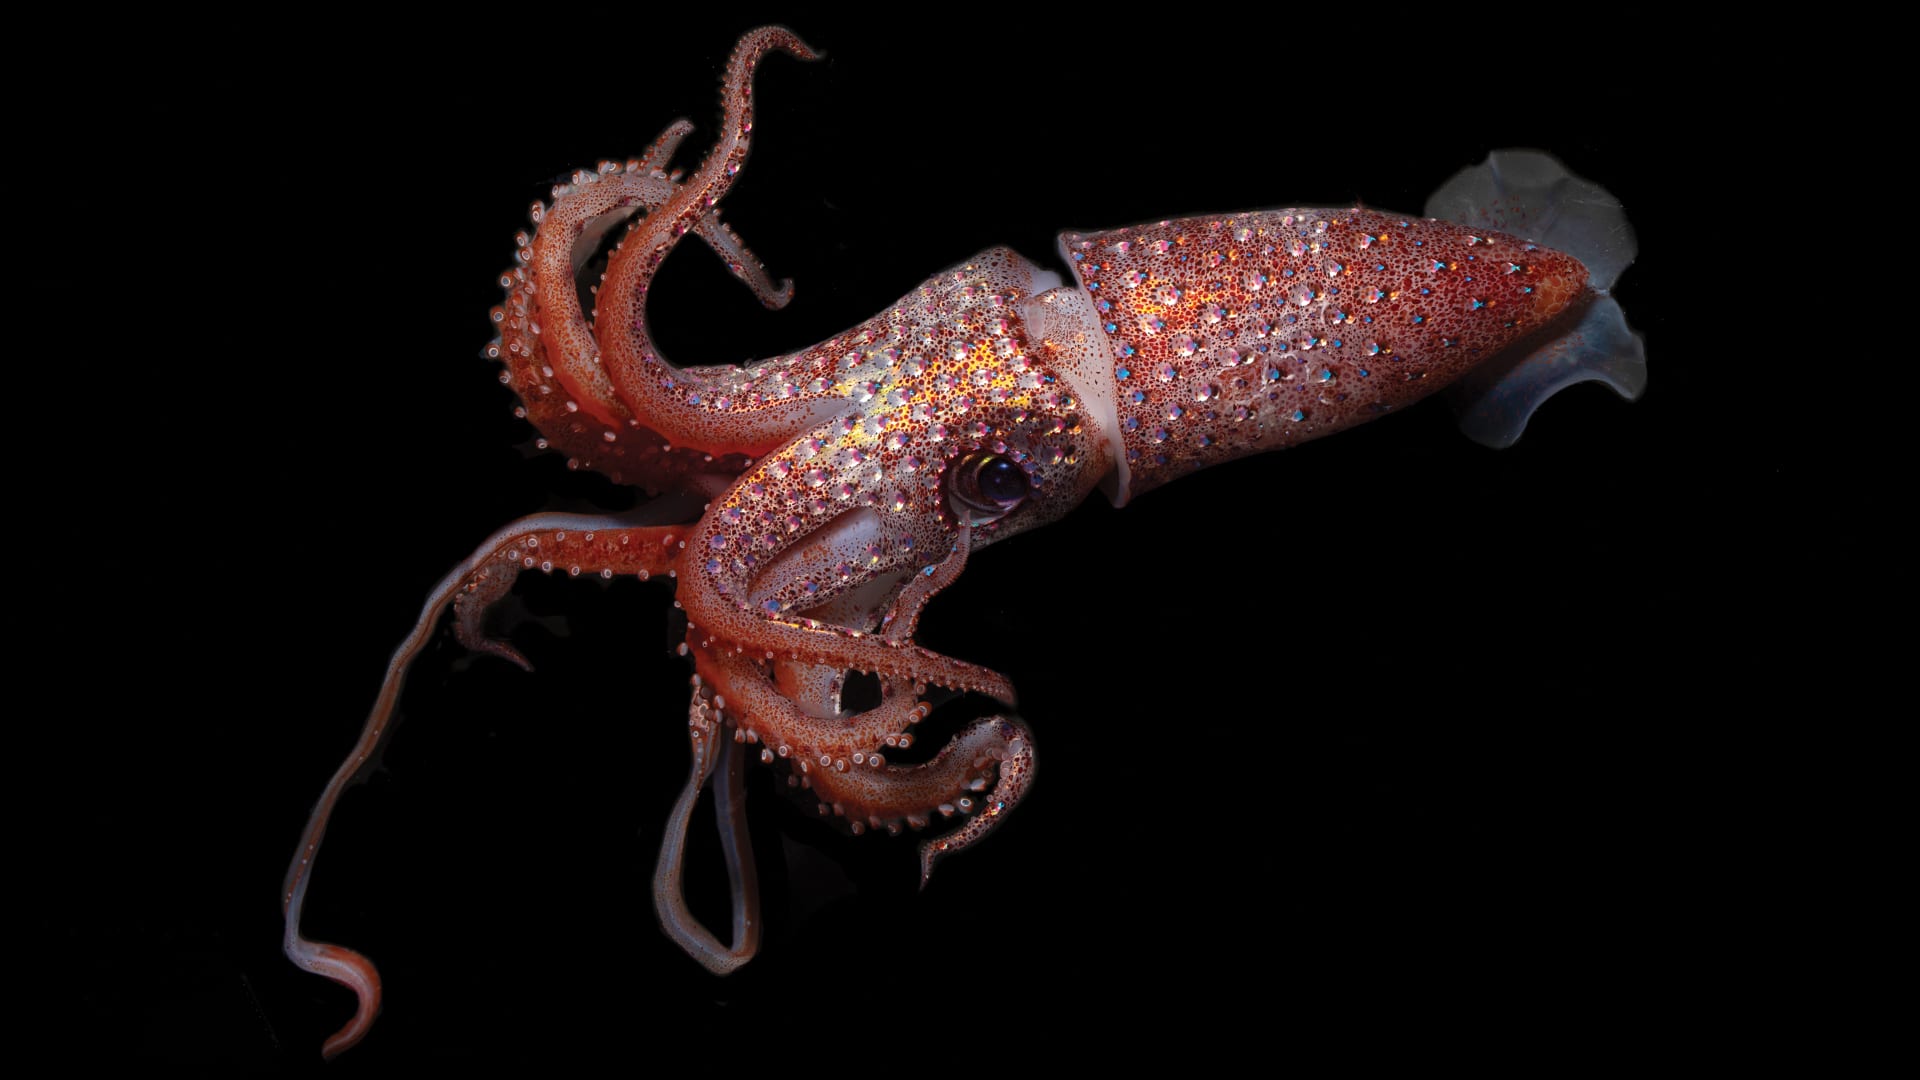 Behold the strawberry squid